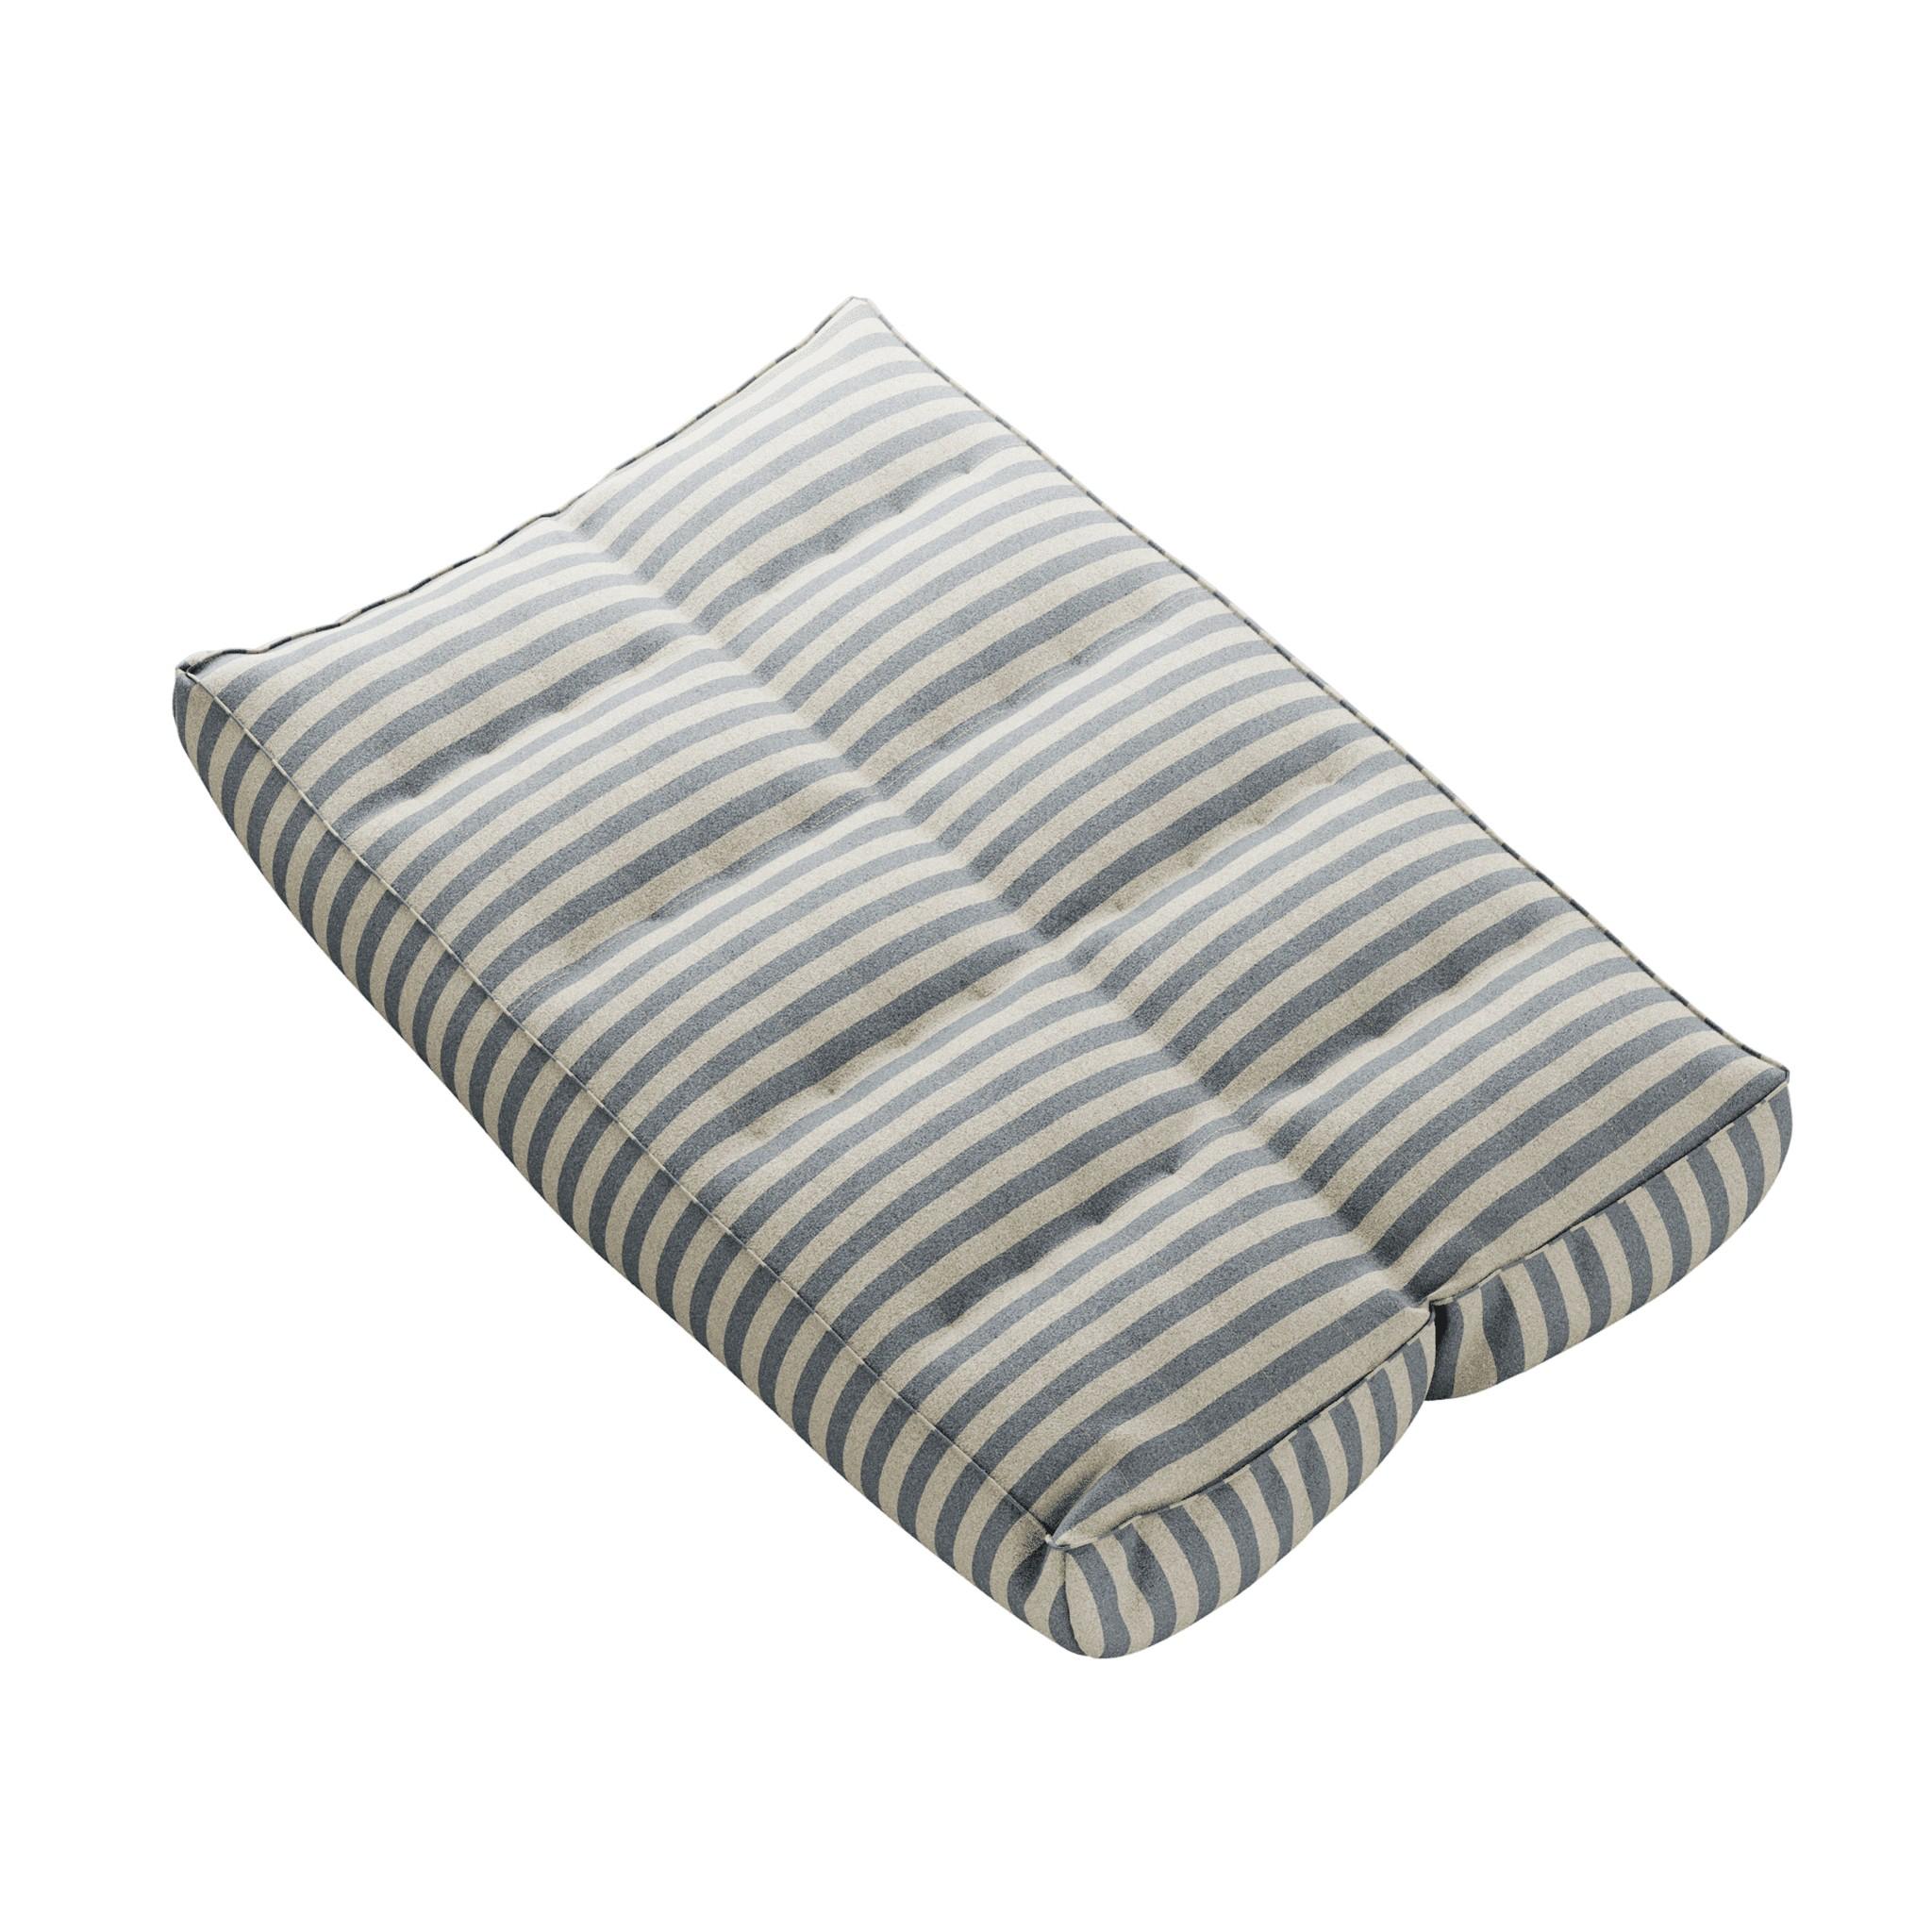 Contemporary Modern Outdoor Sofa Folding Daybed Upholstered in Outdoor Blue Striped Fabric For Sale